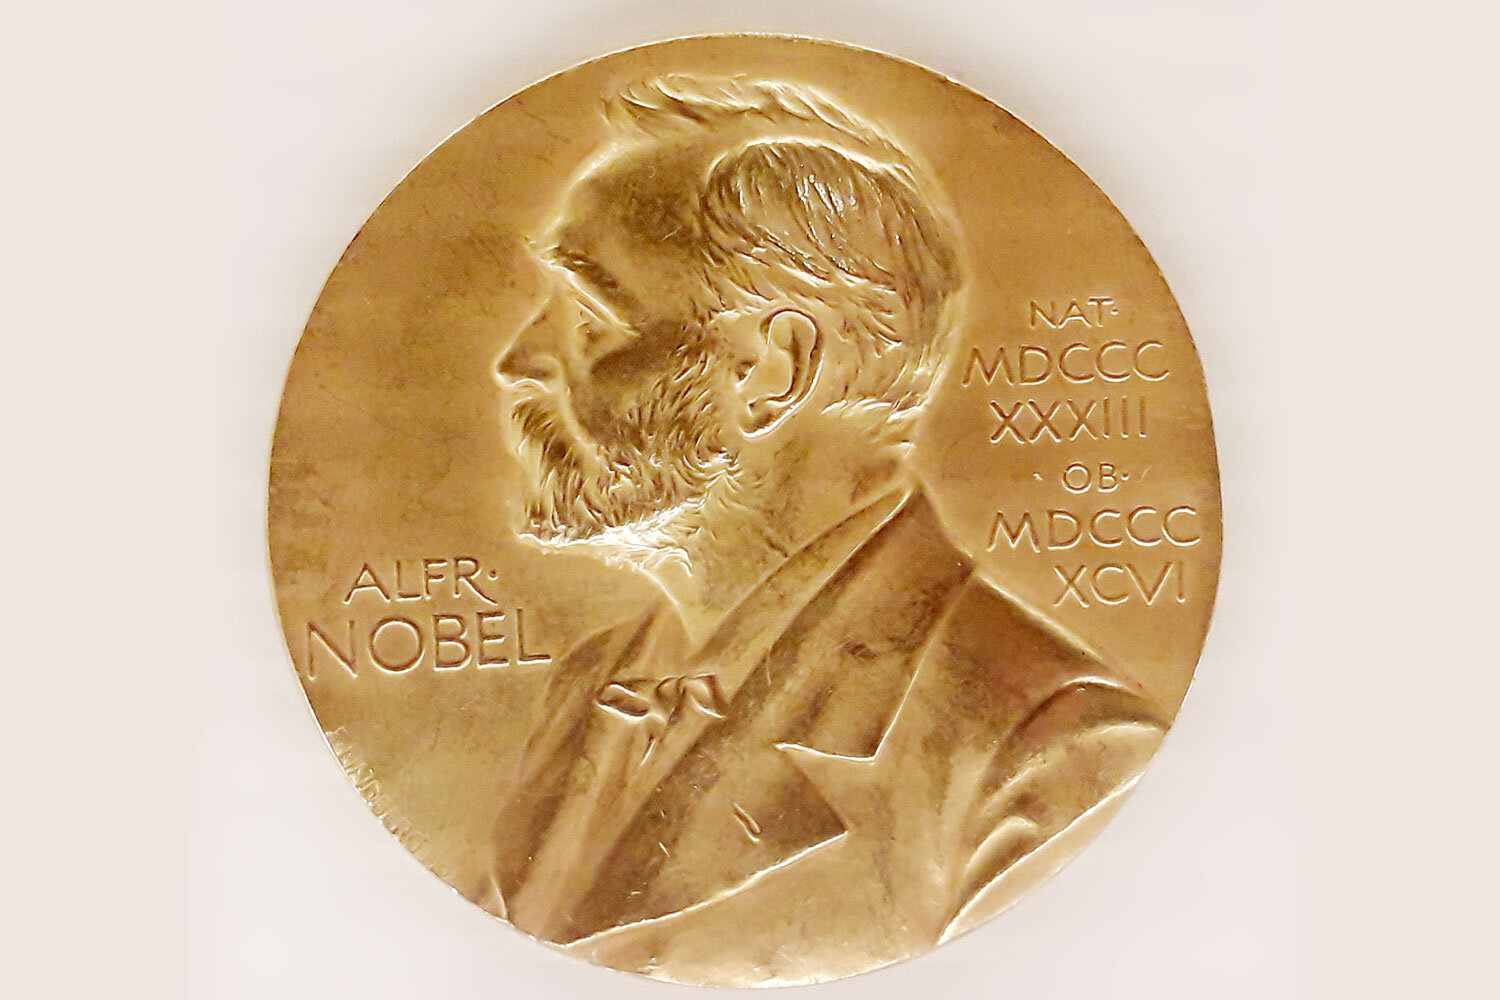 Wednesdays at “The WELL” and Nobel Prize in Chemistry goes to Biotech